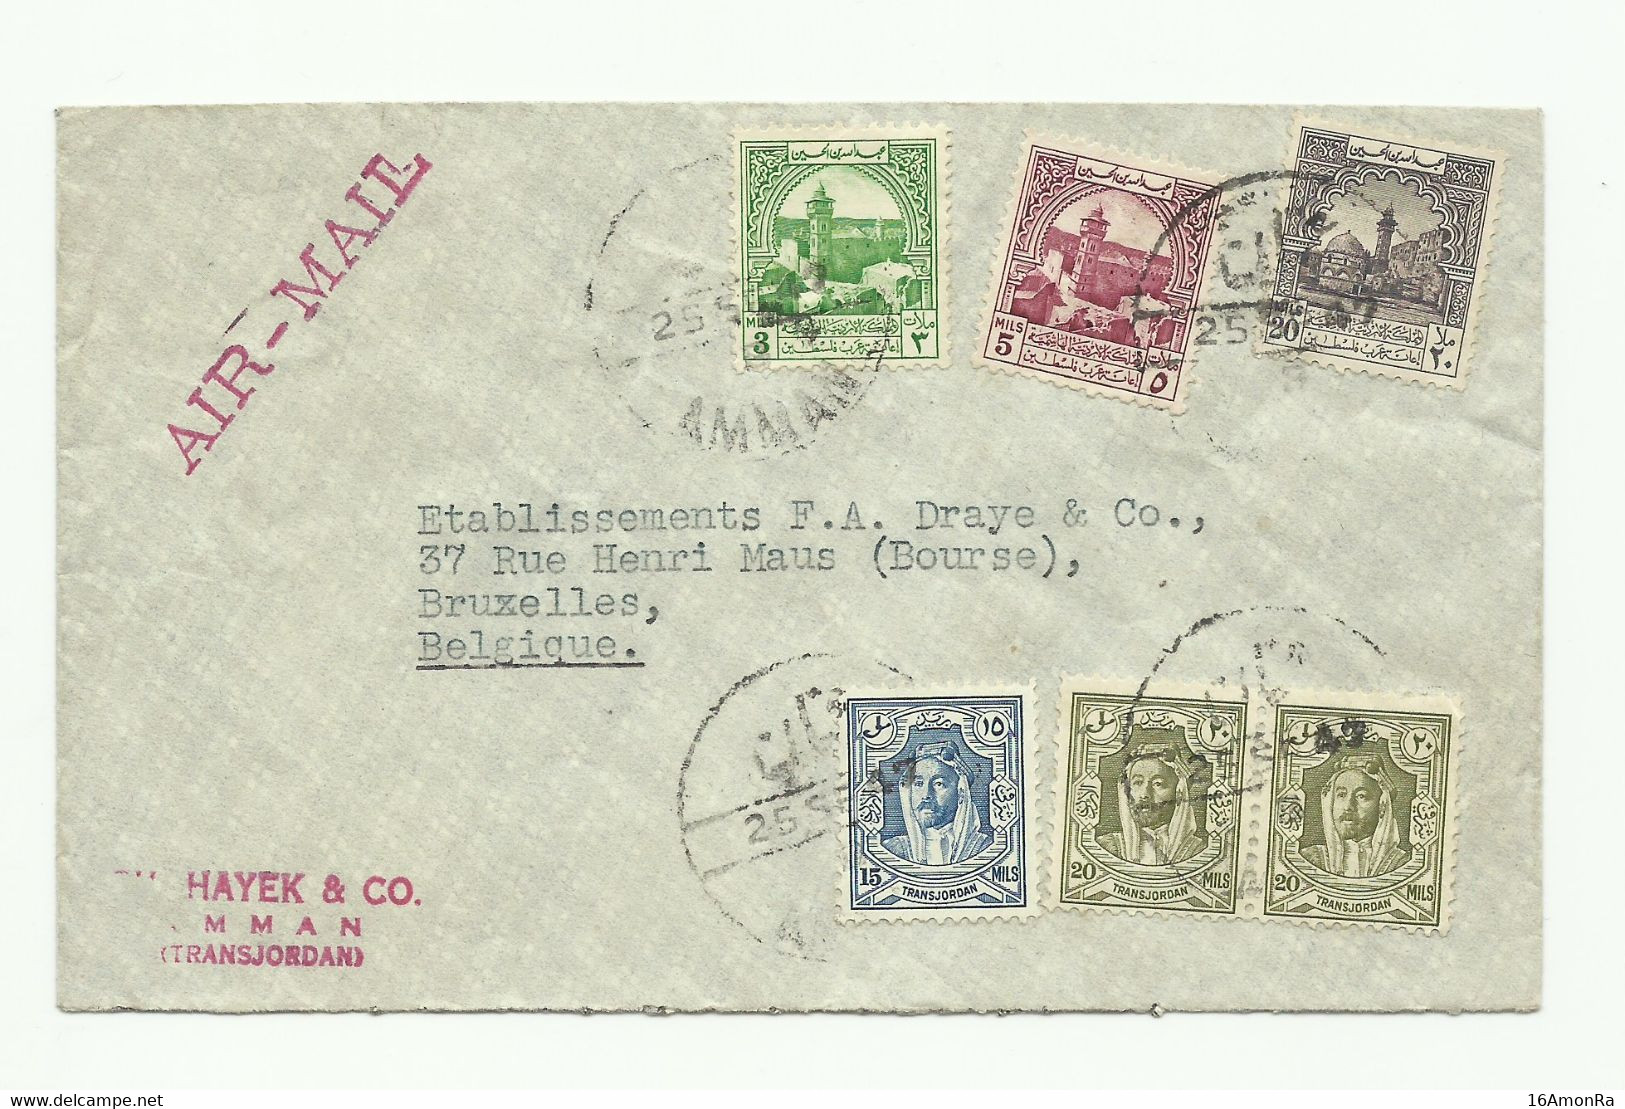 Cover Franked 5 Colours Of 83 Mil. Dc AMMAN (transjordania) 25 Sept. 1947 To Brussels (Belgium)  - W1374 - Palestine